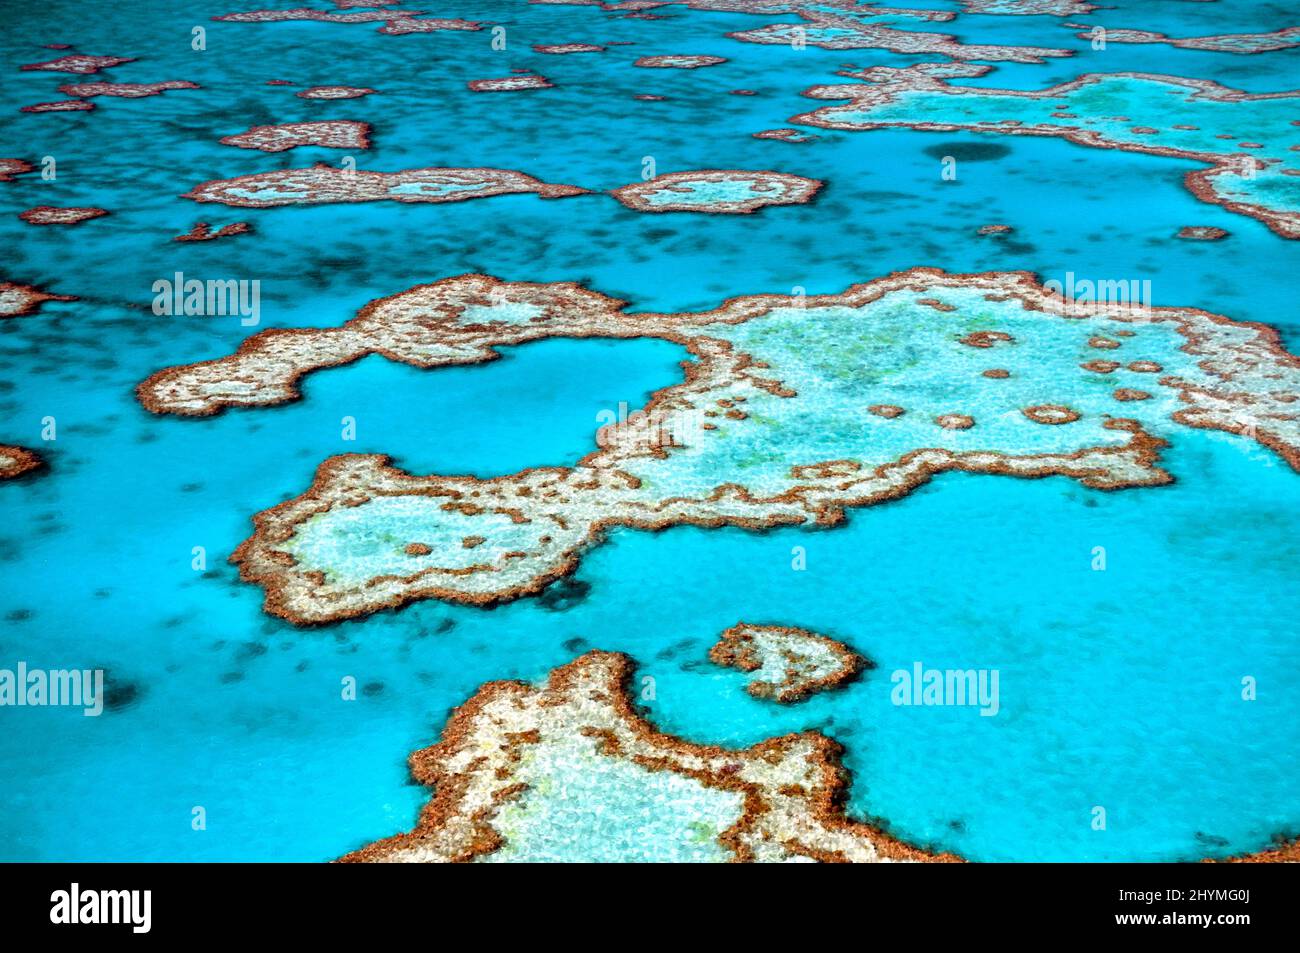 Great Barrier Reef, aerial view, Australia Stock Photo